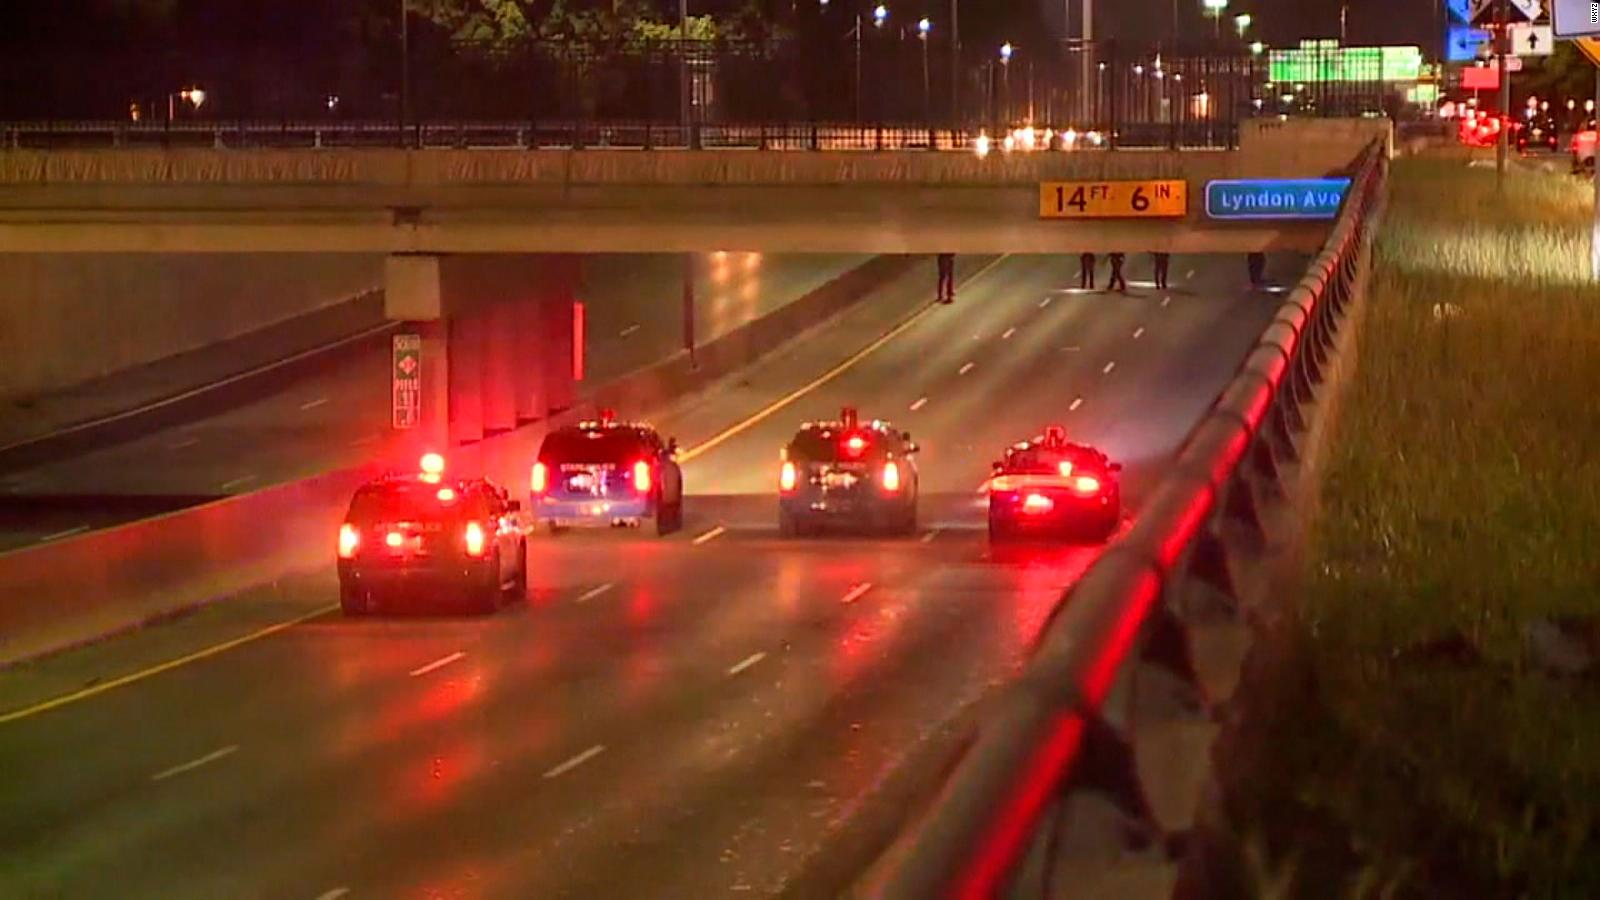 Shootings on Detroit freeway leave one child dead, 3 others injured CNN